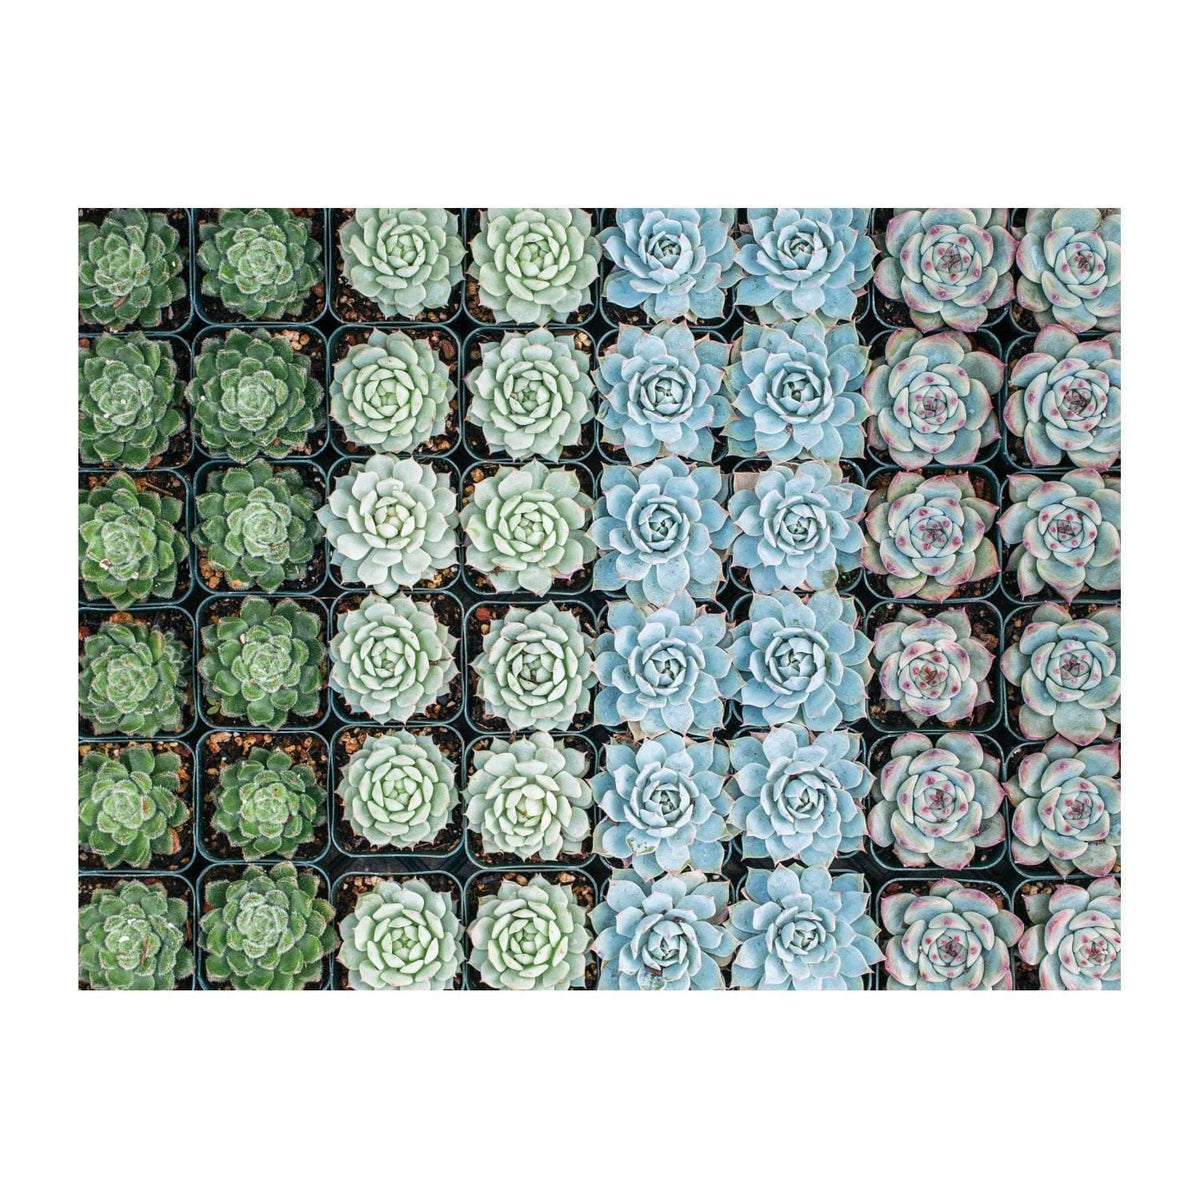 Succulent Garden 2-Sided 500 Piece Puzzle 2-sided 500 Piece Puzzles Galison 